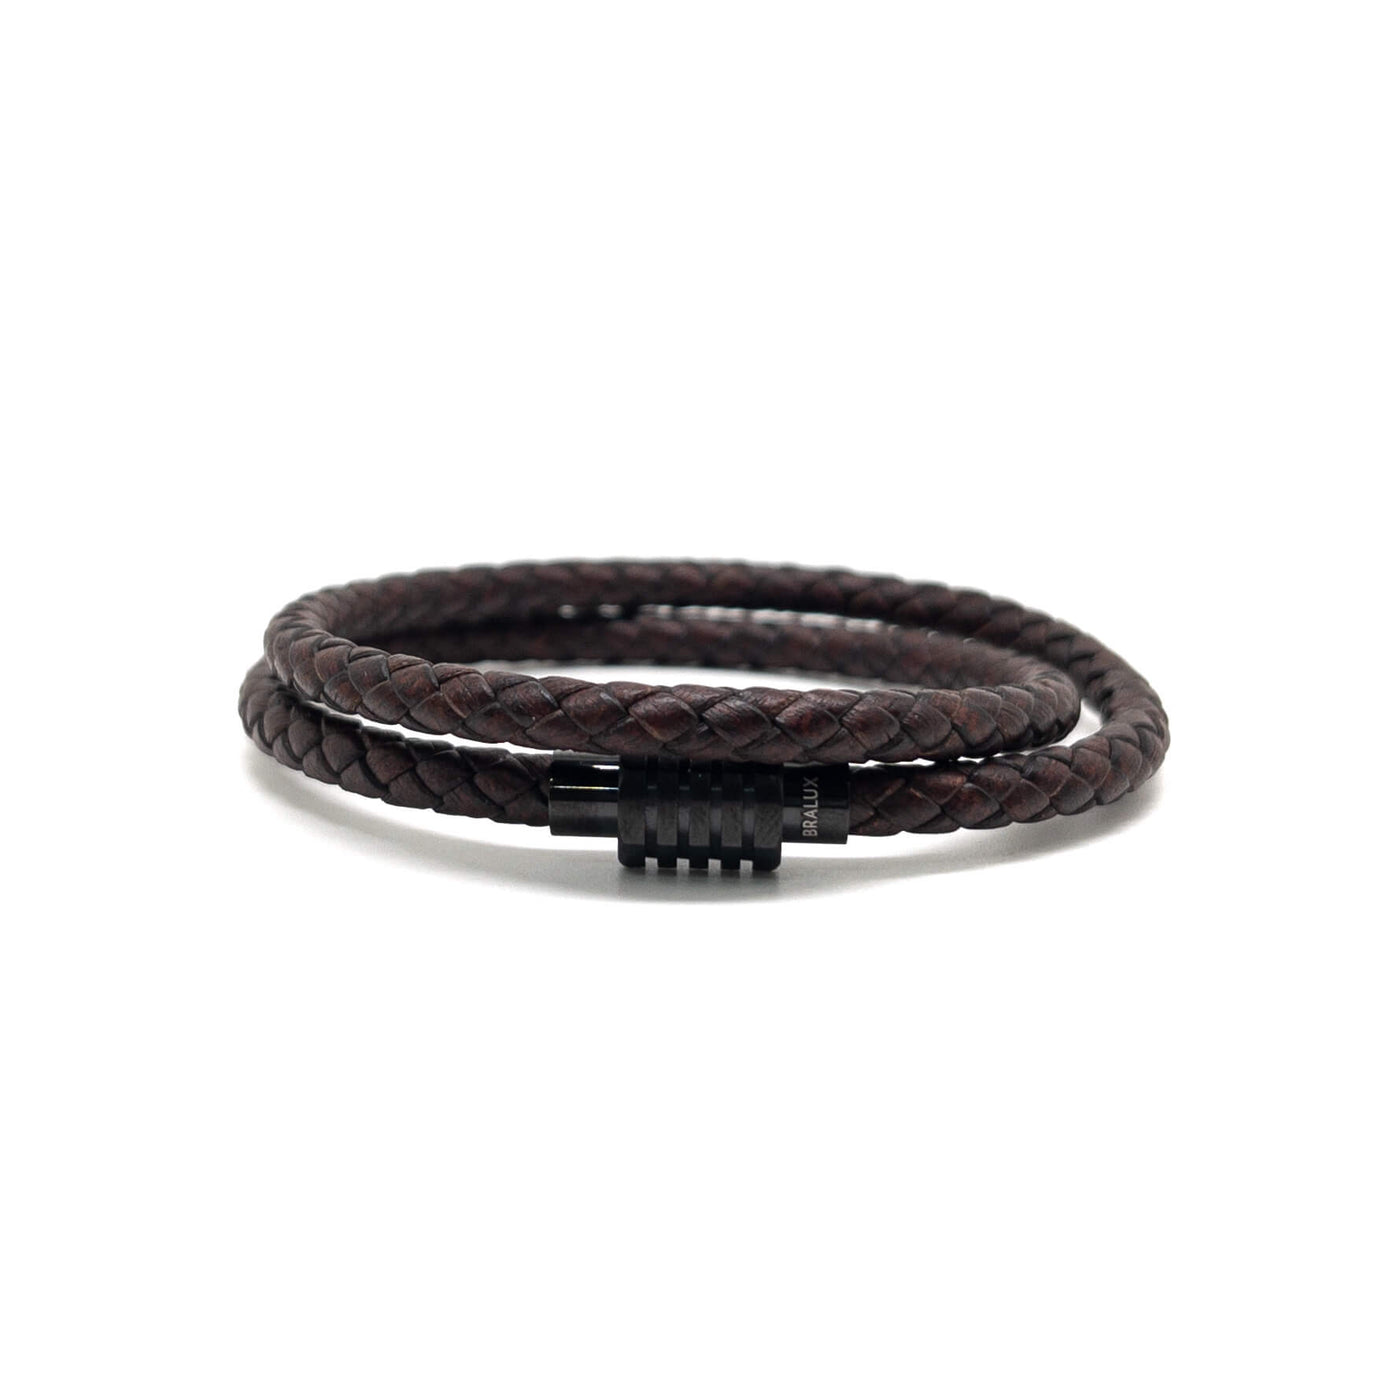 The Dark Brown duo and Black Plated Buckle Leather bracelet